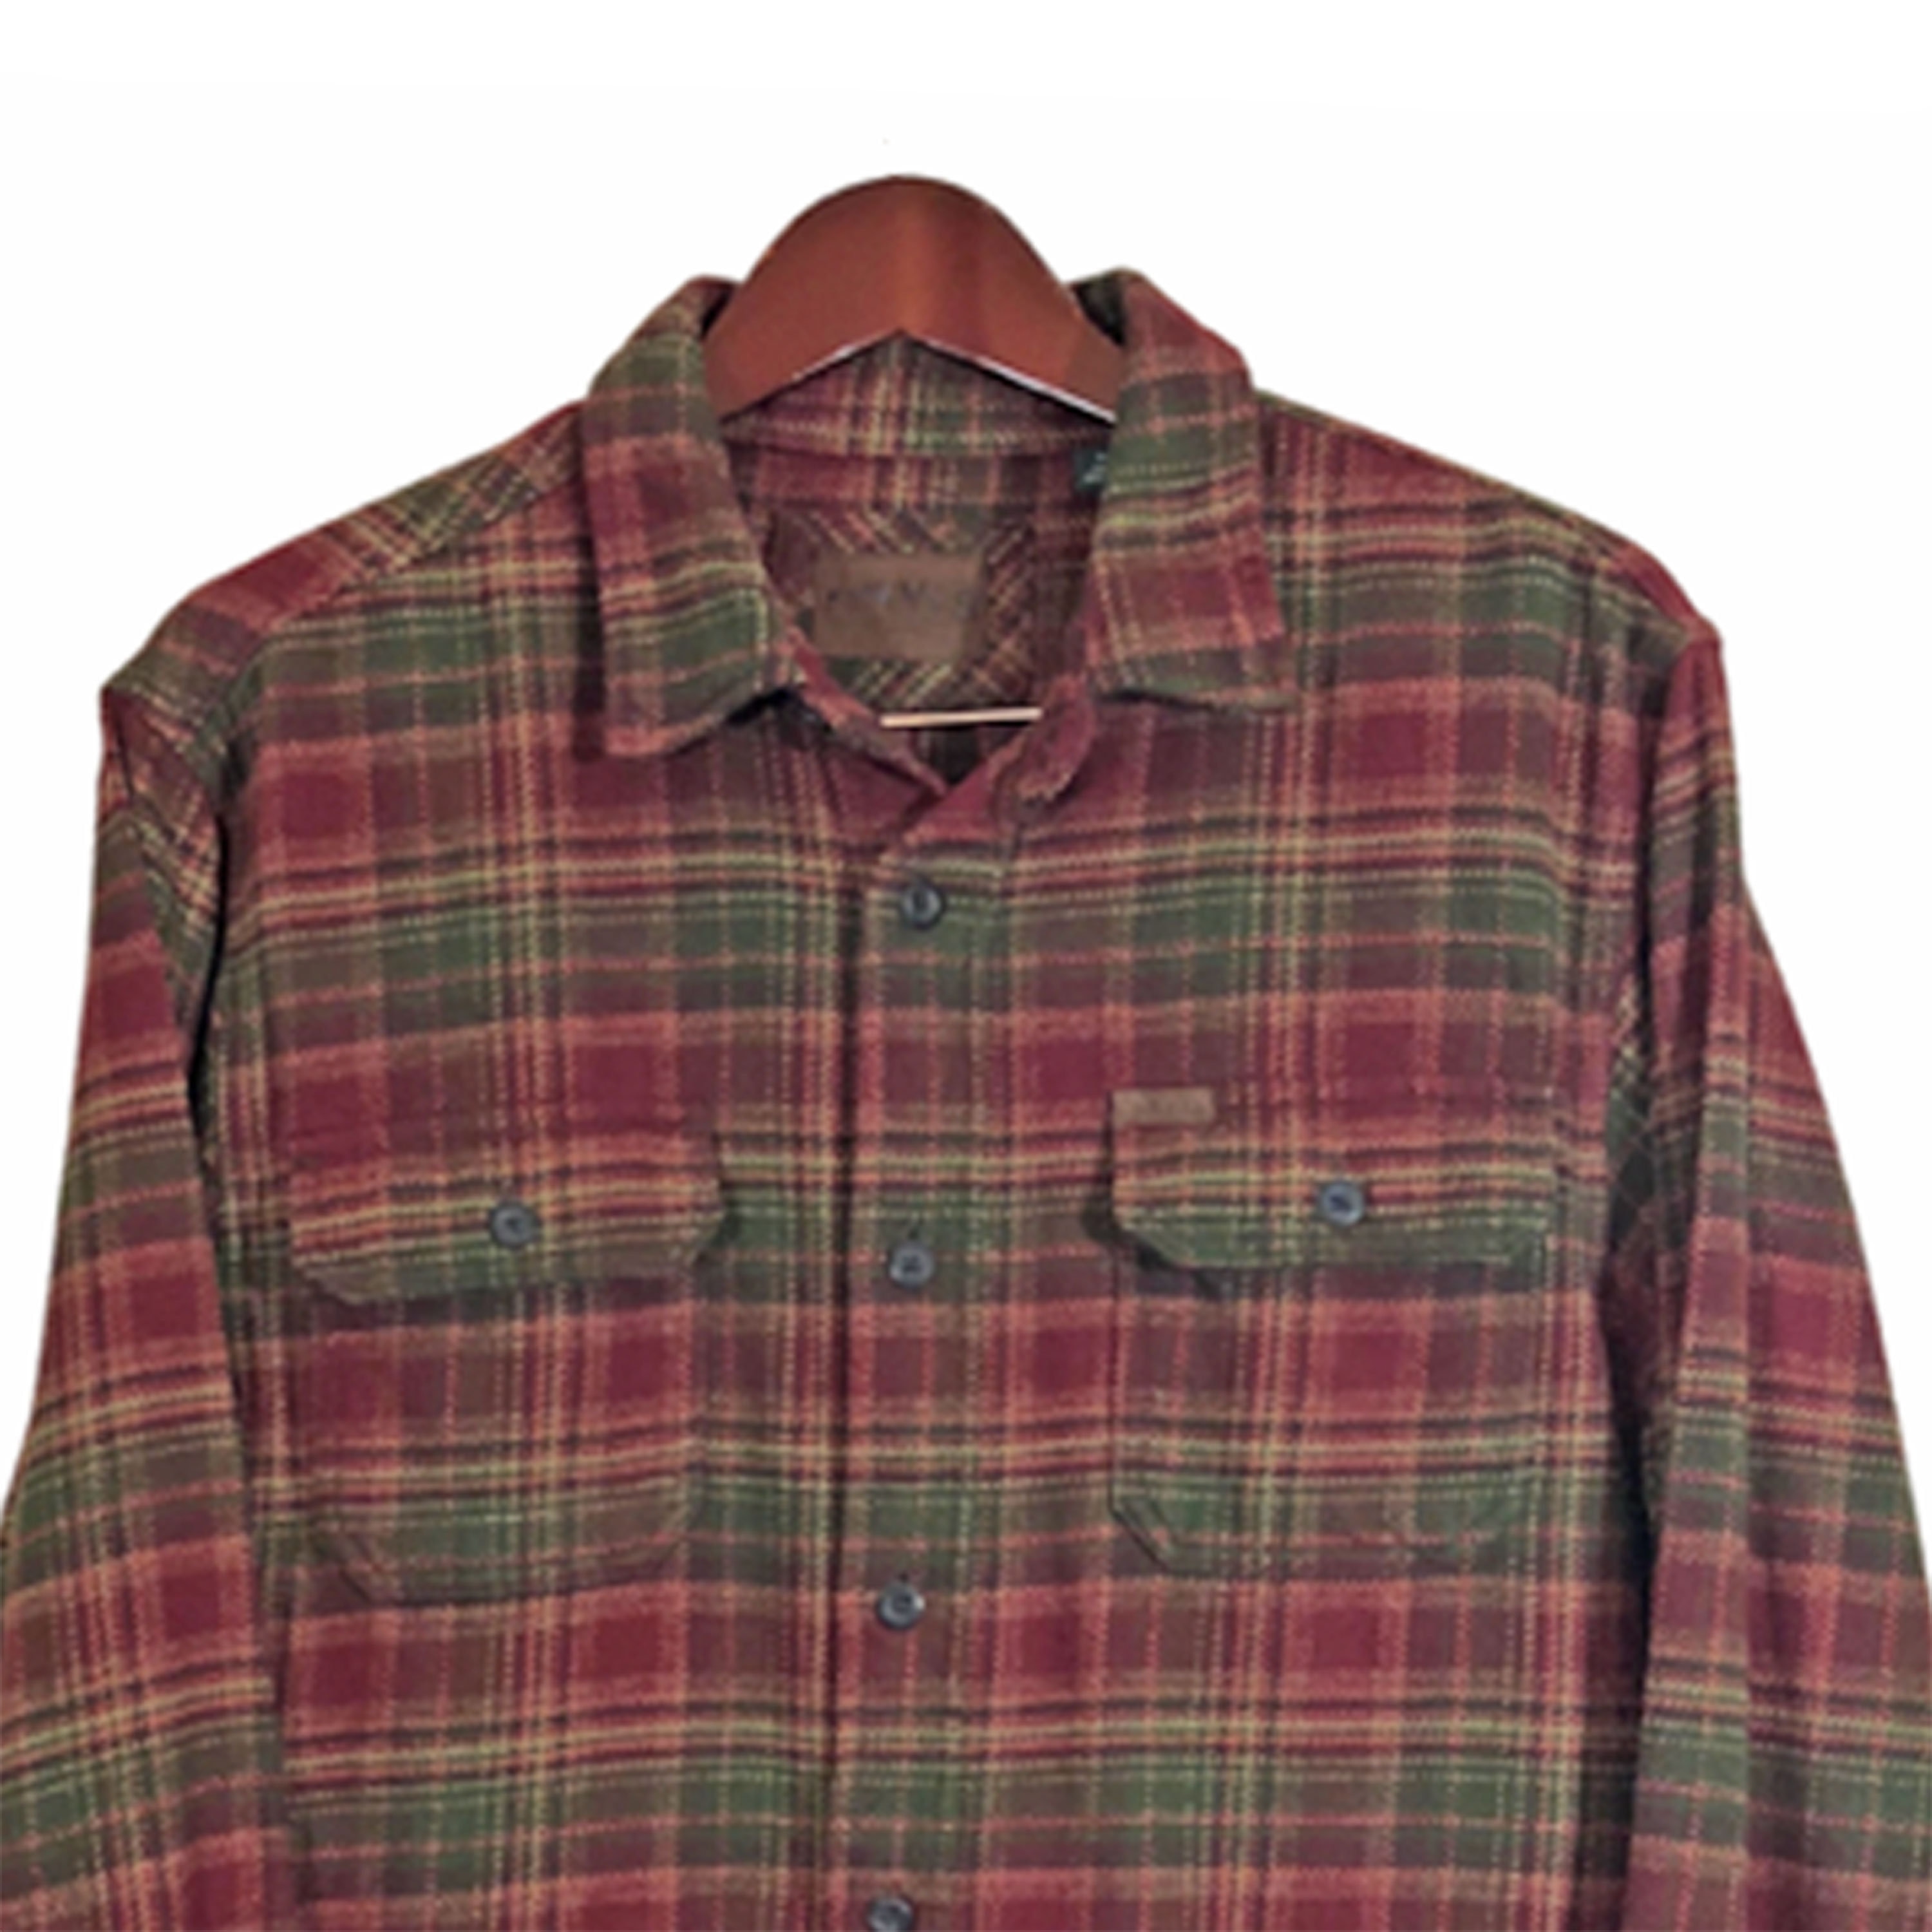 NEW! Orvis - Heavy Weight Flannel Shirts - Plaid - Red, Green, Navy, & Brown